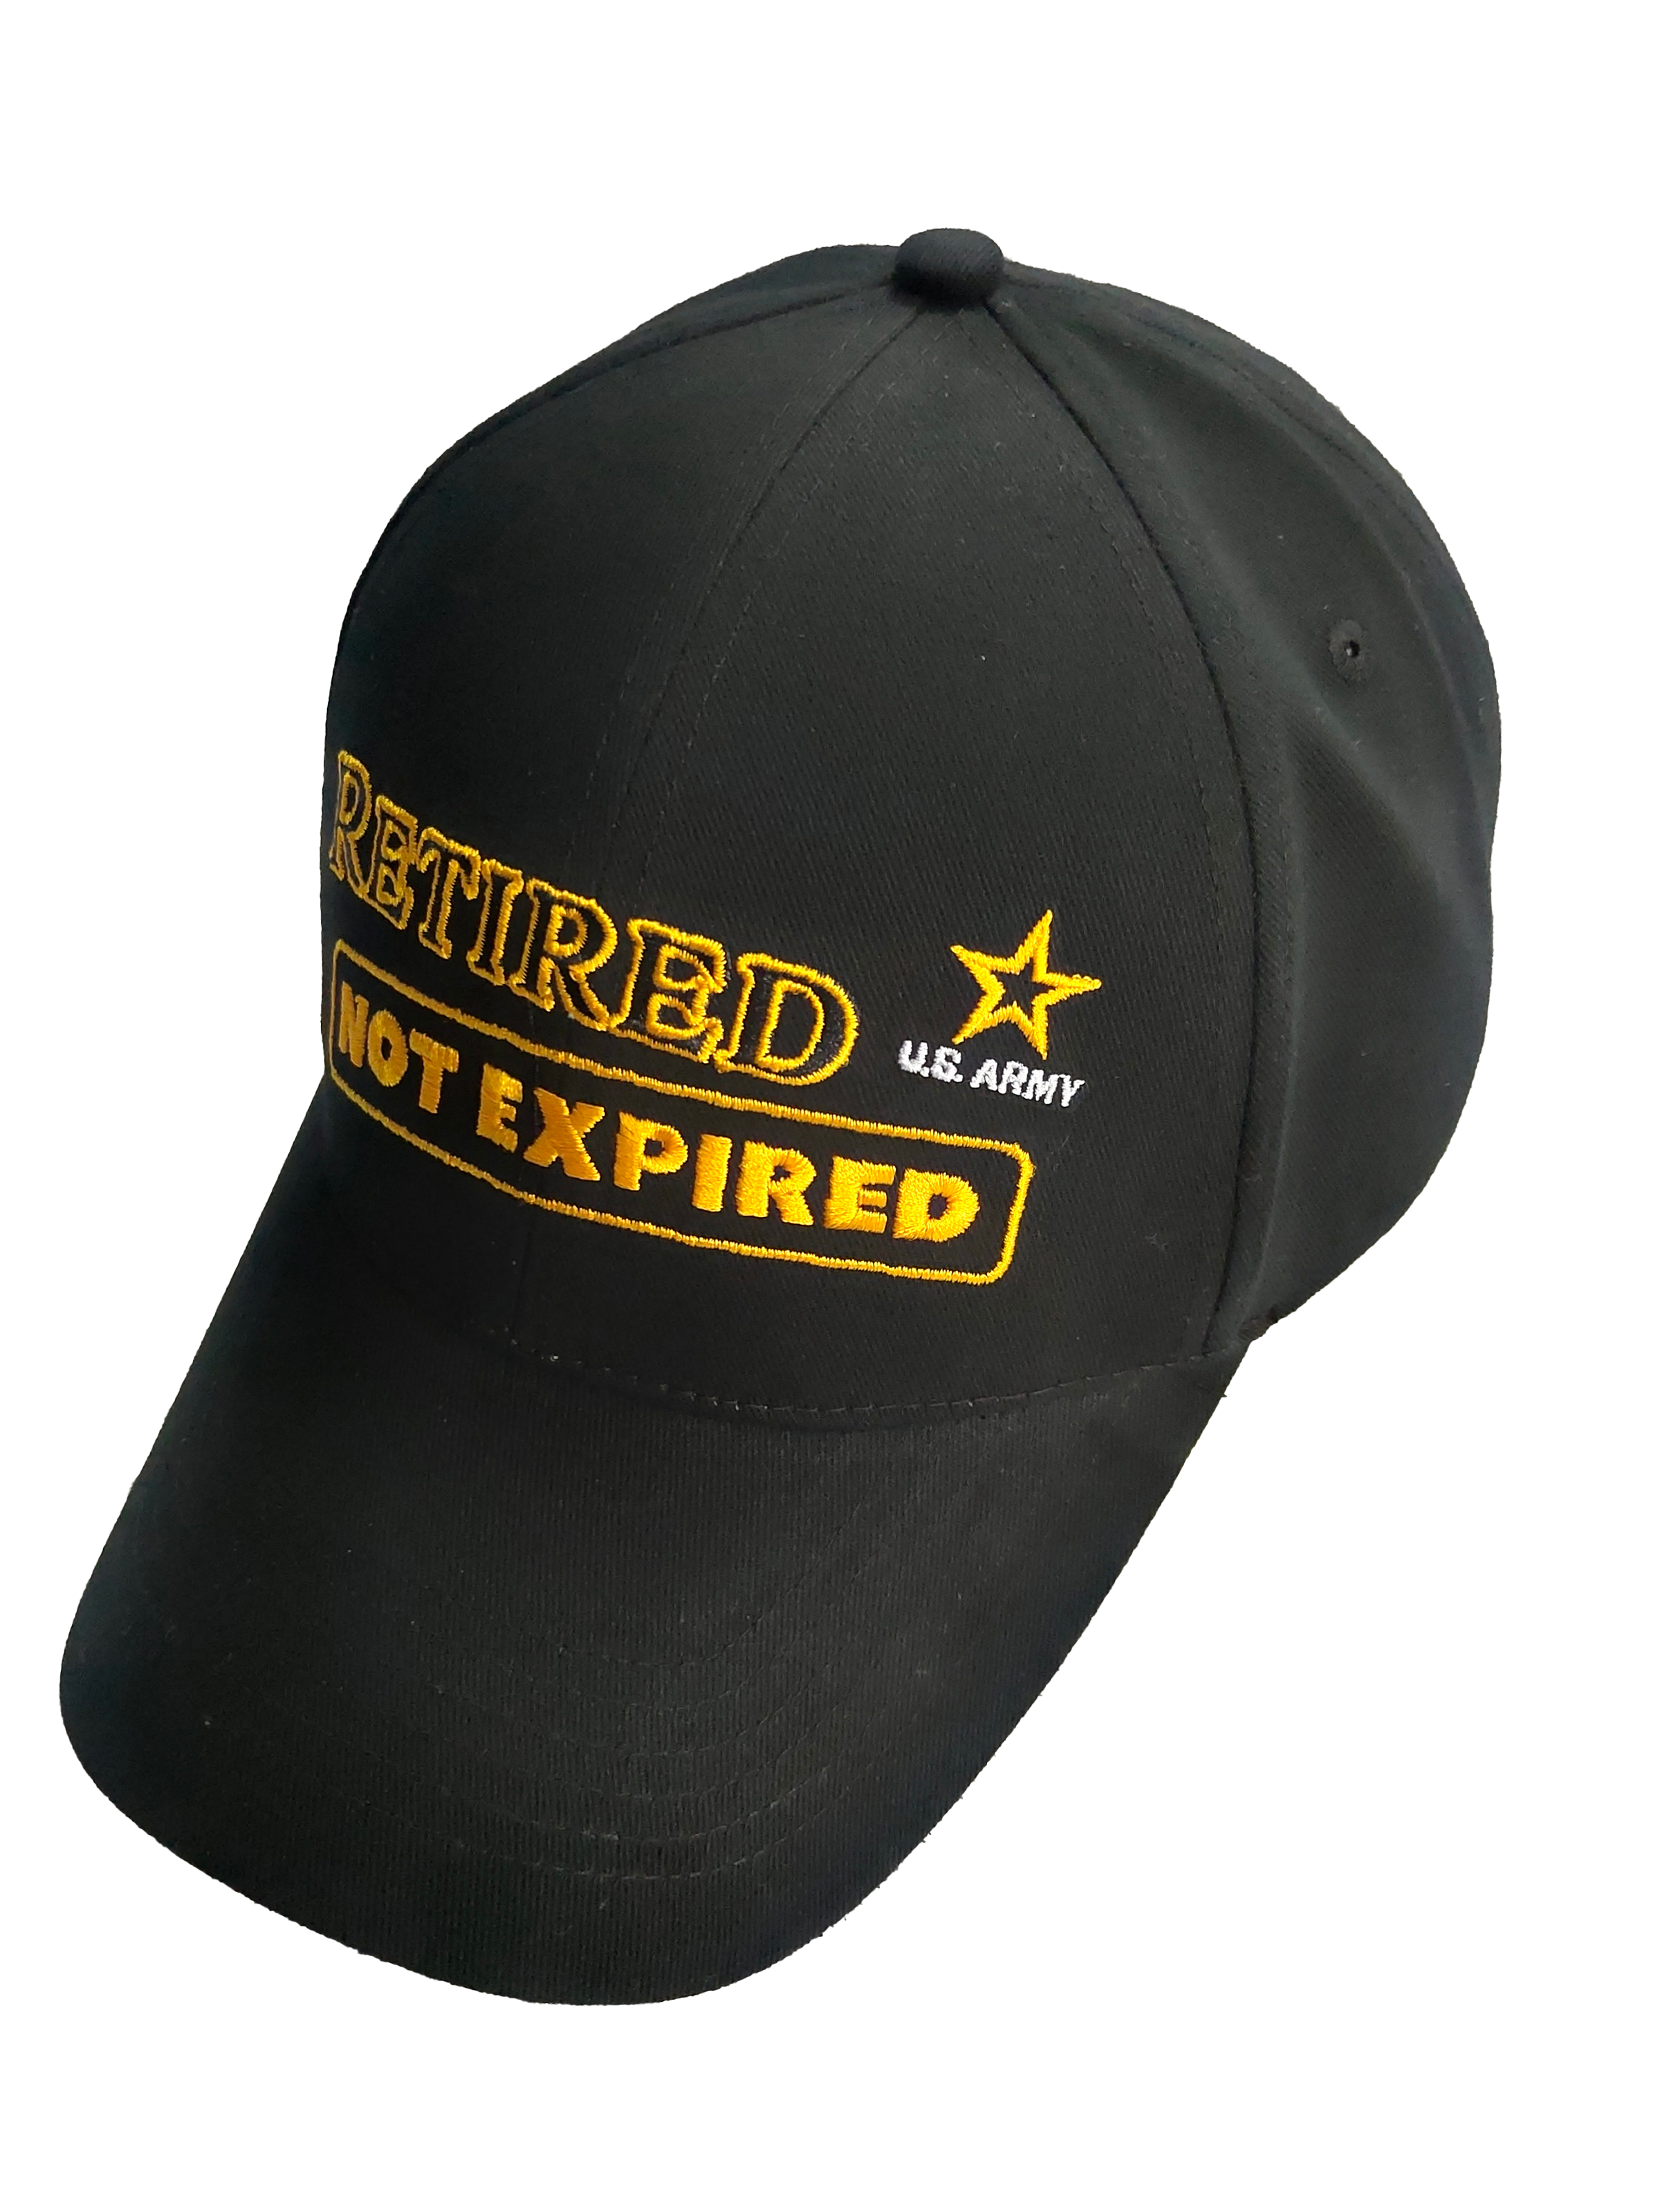 CAP-ARMY RETIRED NOT EXPIRED (BLK)